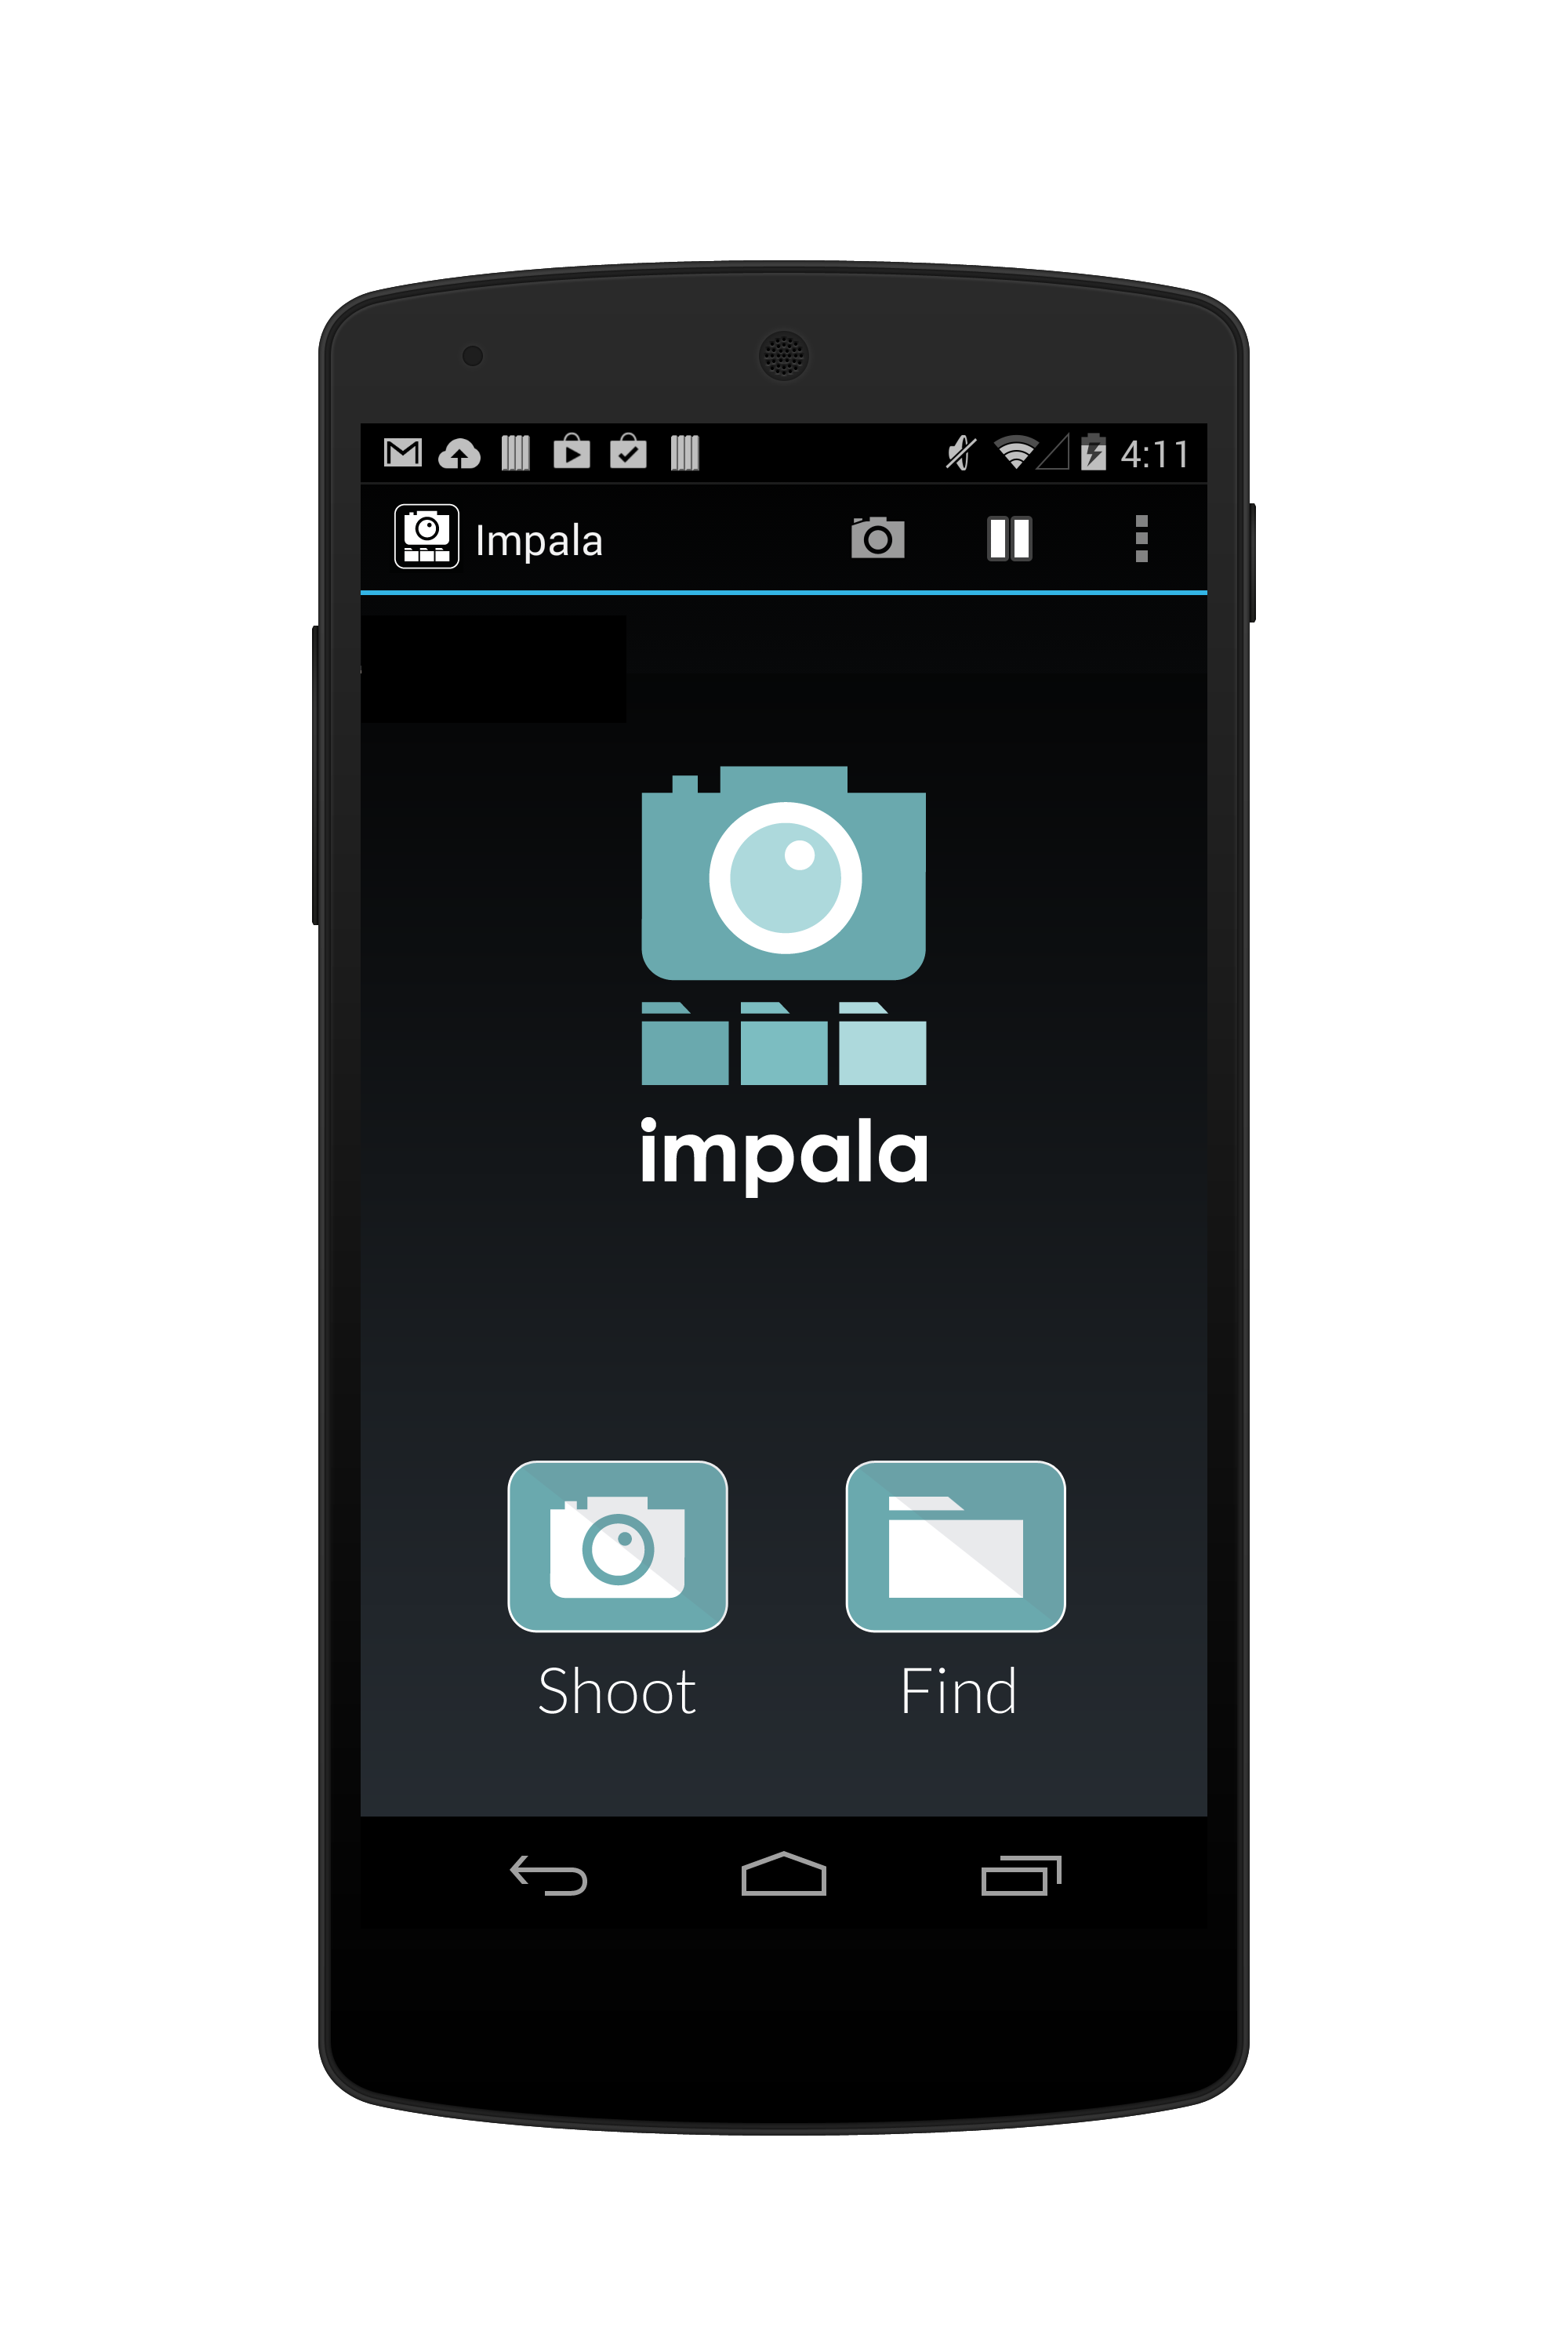 Screenshot of the startup screen of the Impala mobile app